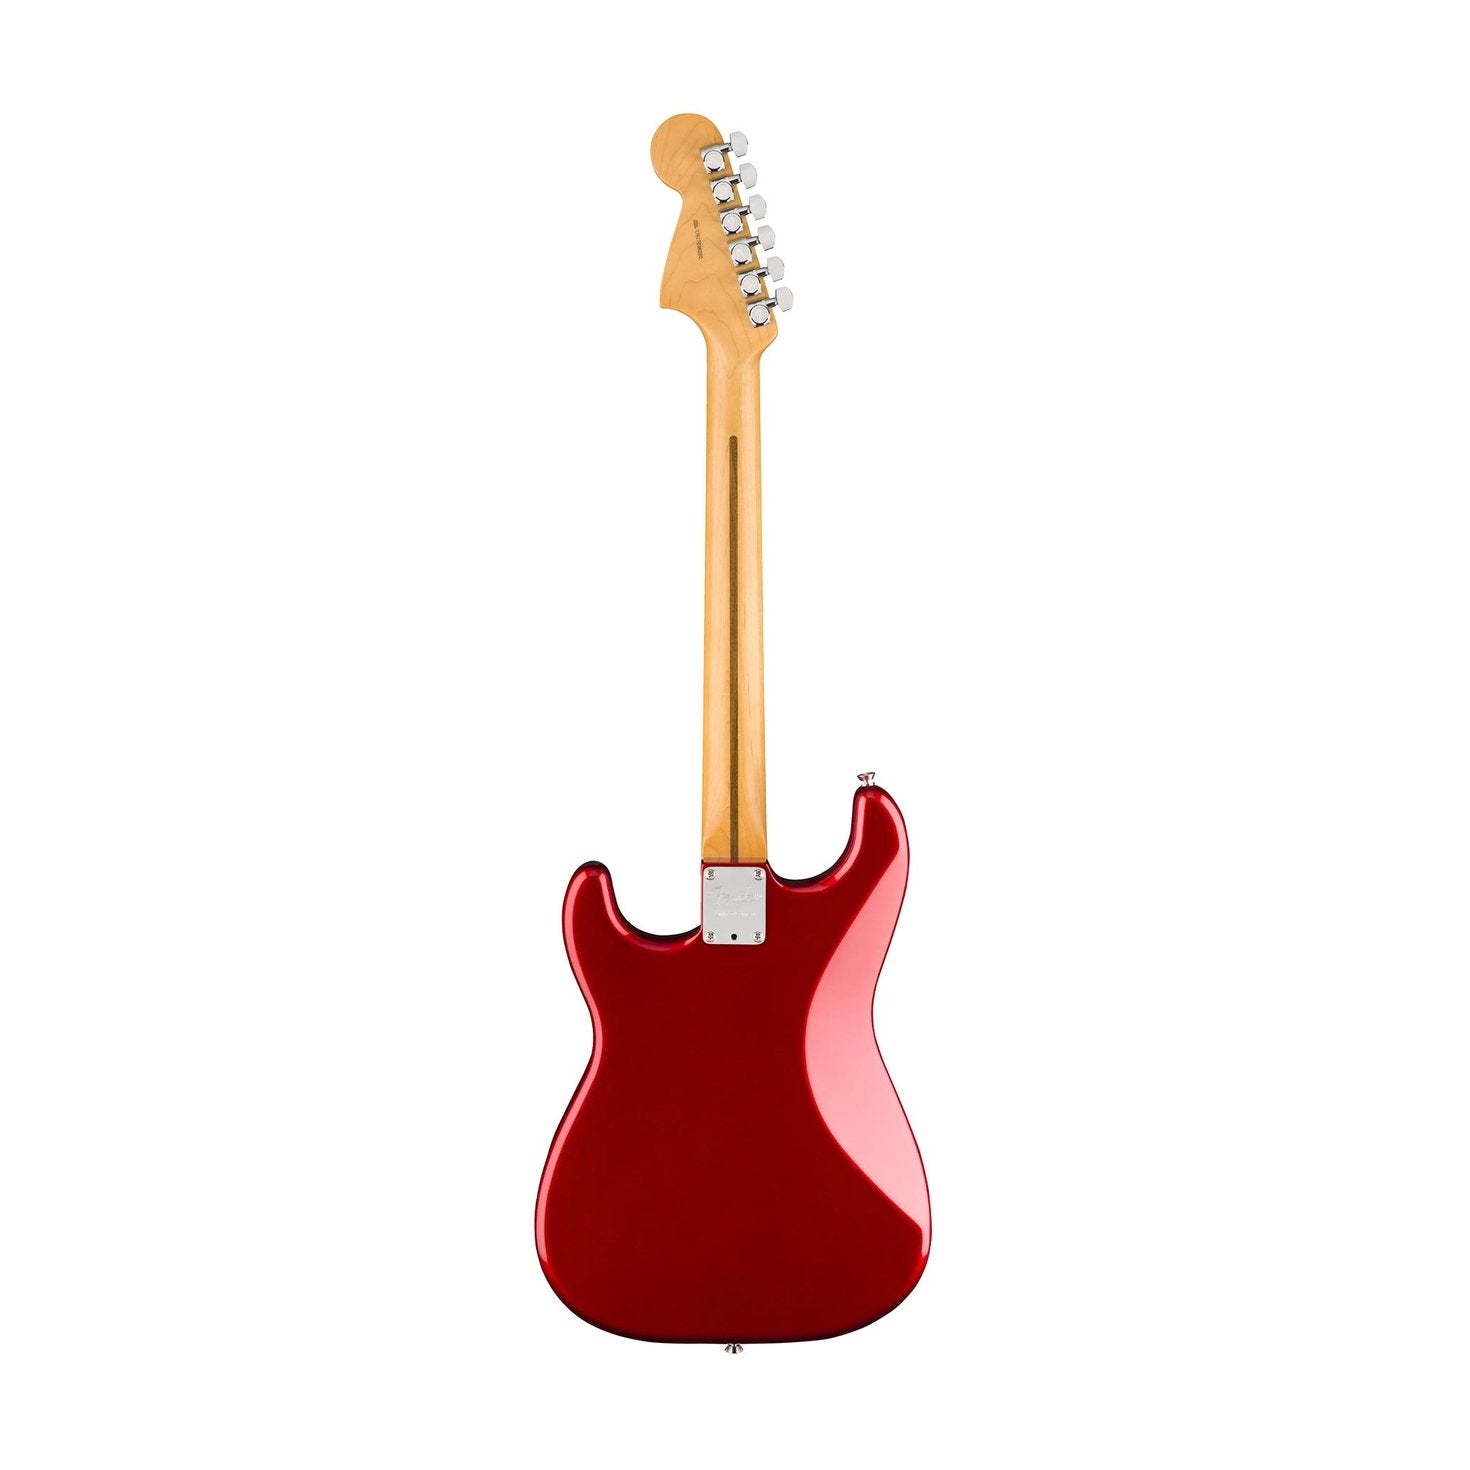 Fender Ltd Ed Parallel Universe Jaguar Stratocaster Electric Guitar, Rosewood Fb, Candy Apple Red, FENDER, ELECTRIC GUITAR, fender-electric-guitar-f03-017-6070-709, ZOSO MUSIC SDN BHD